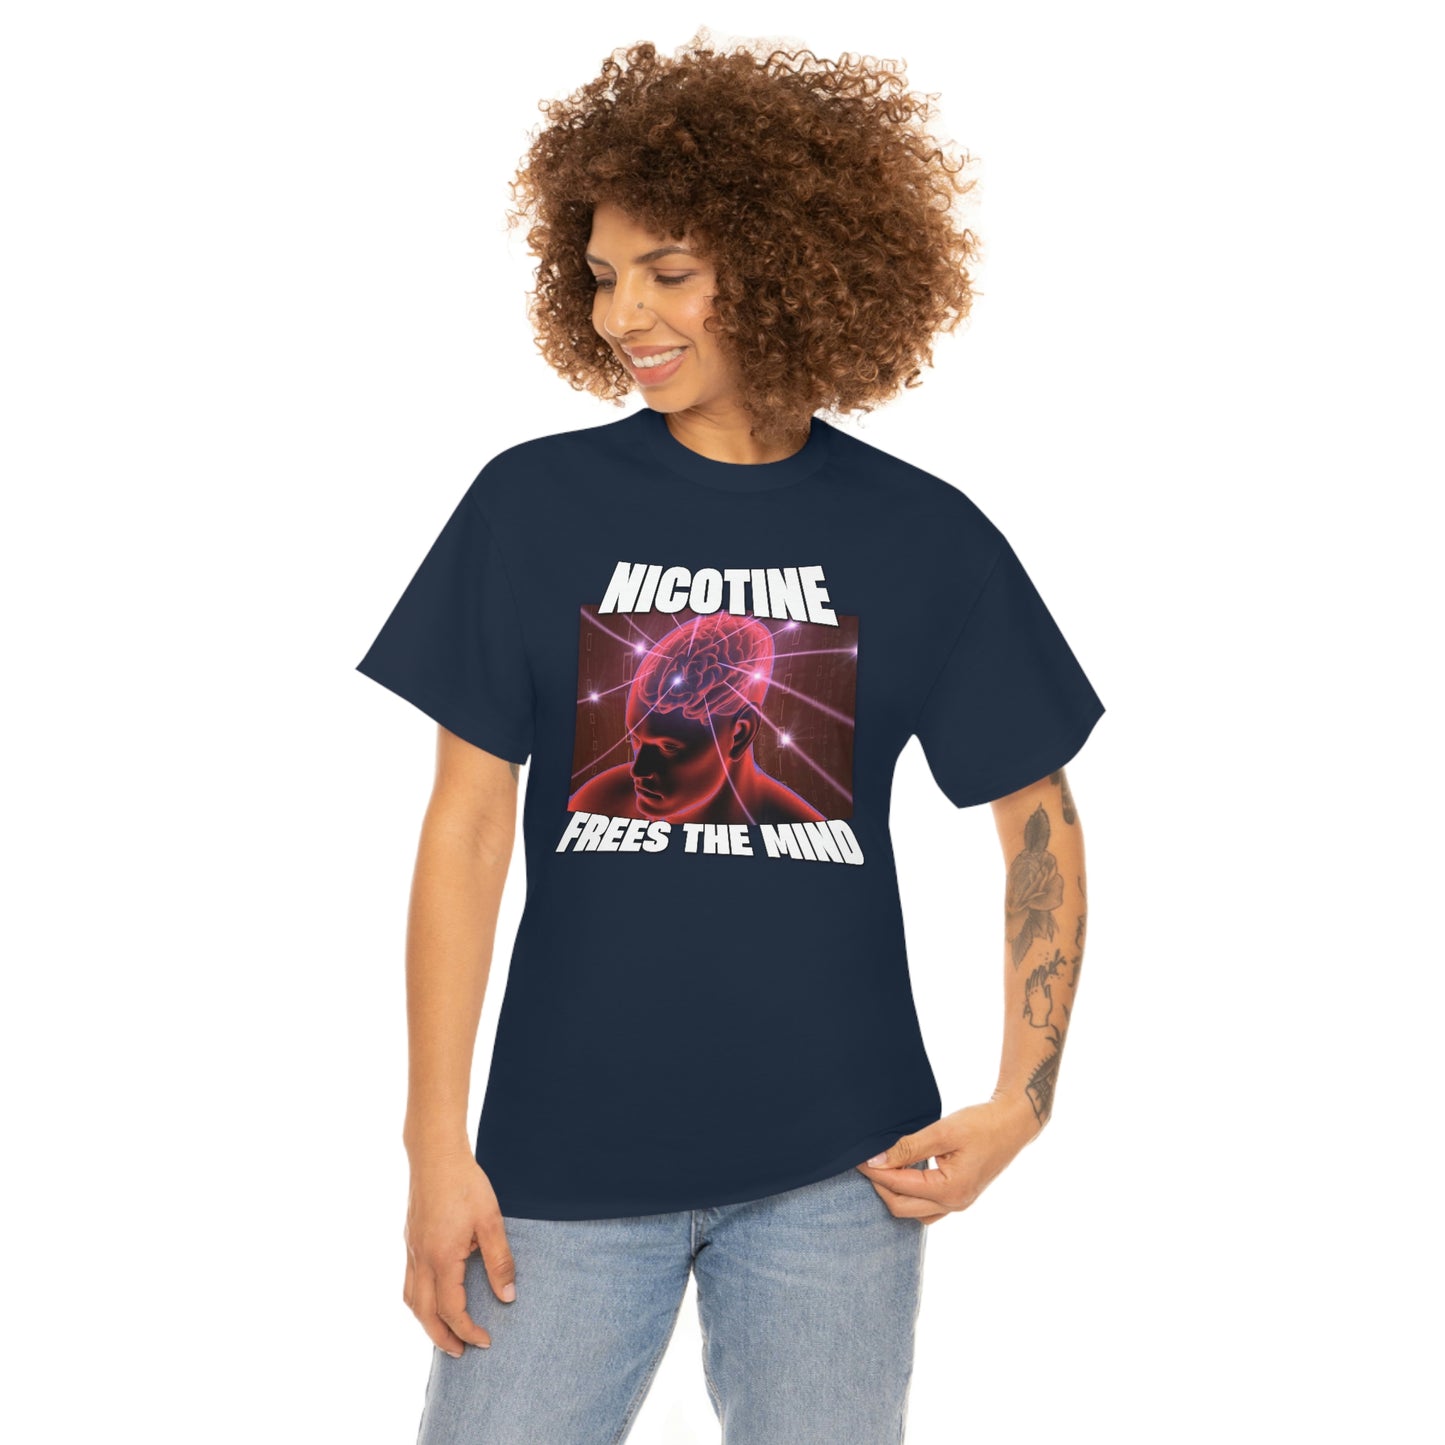 NICOTINE FREES THE MIND T-SHIRT